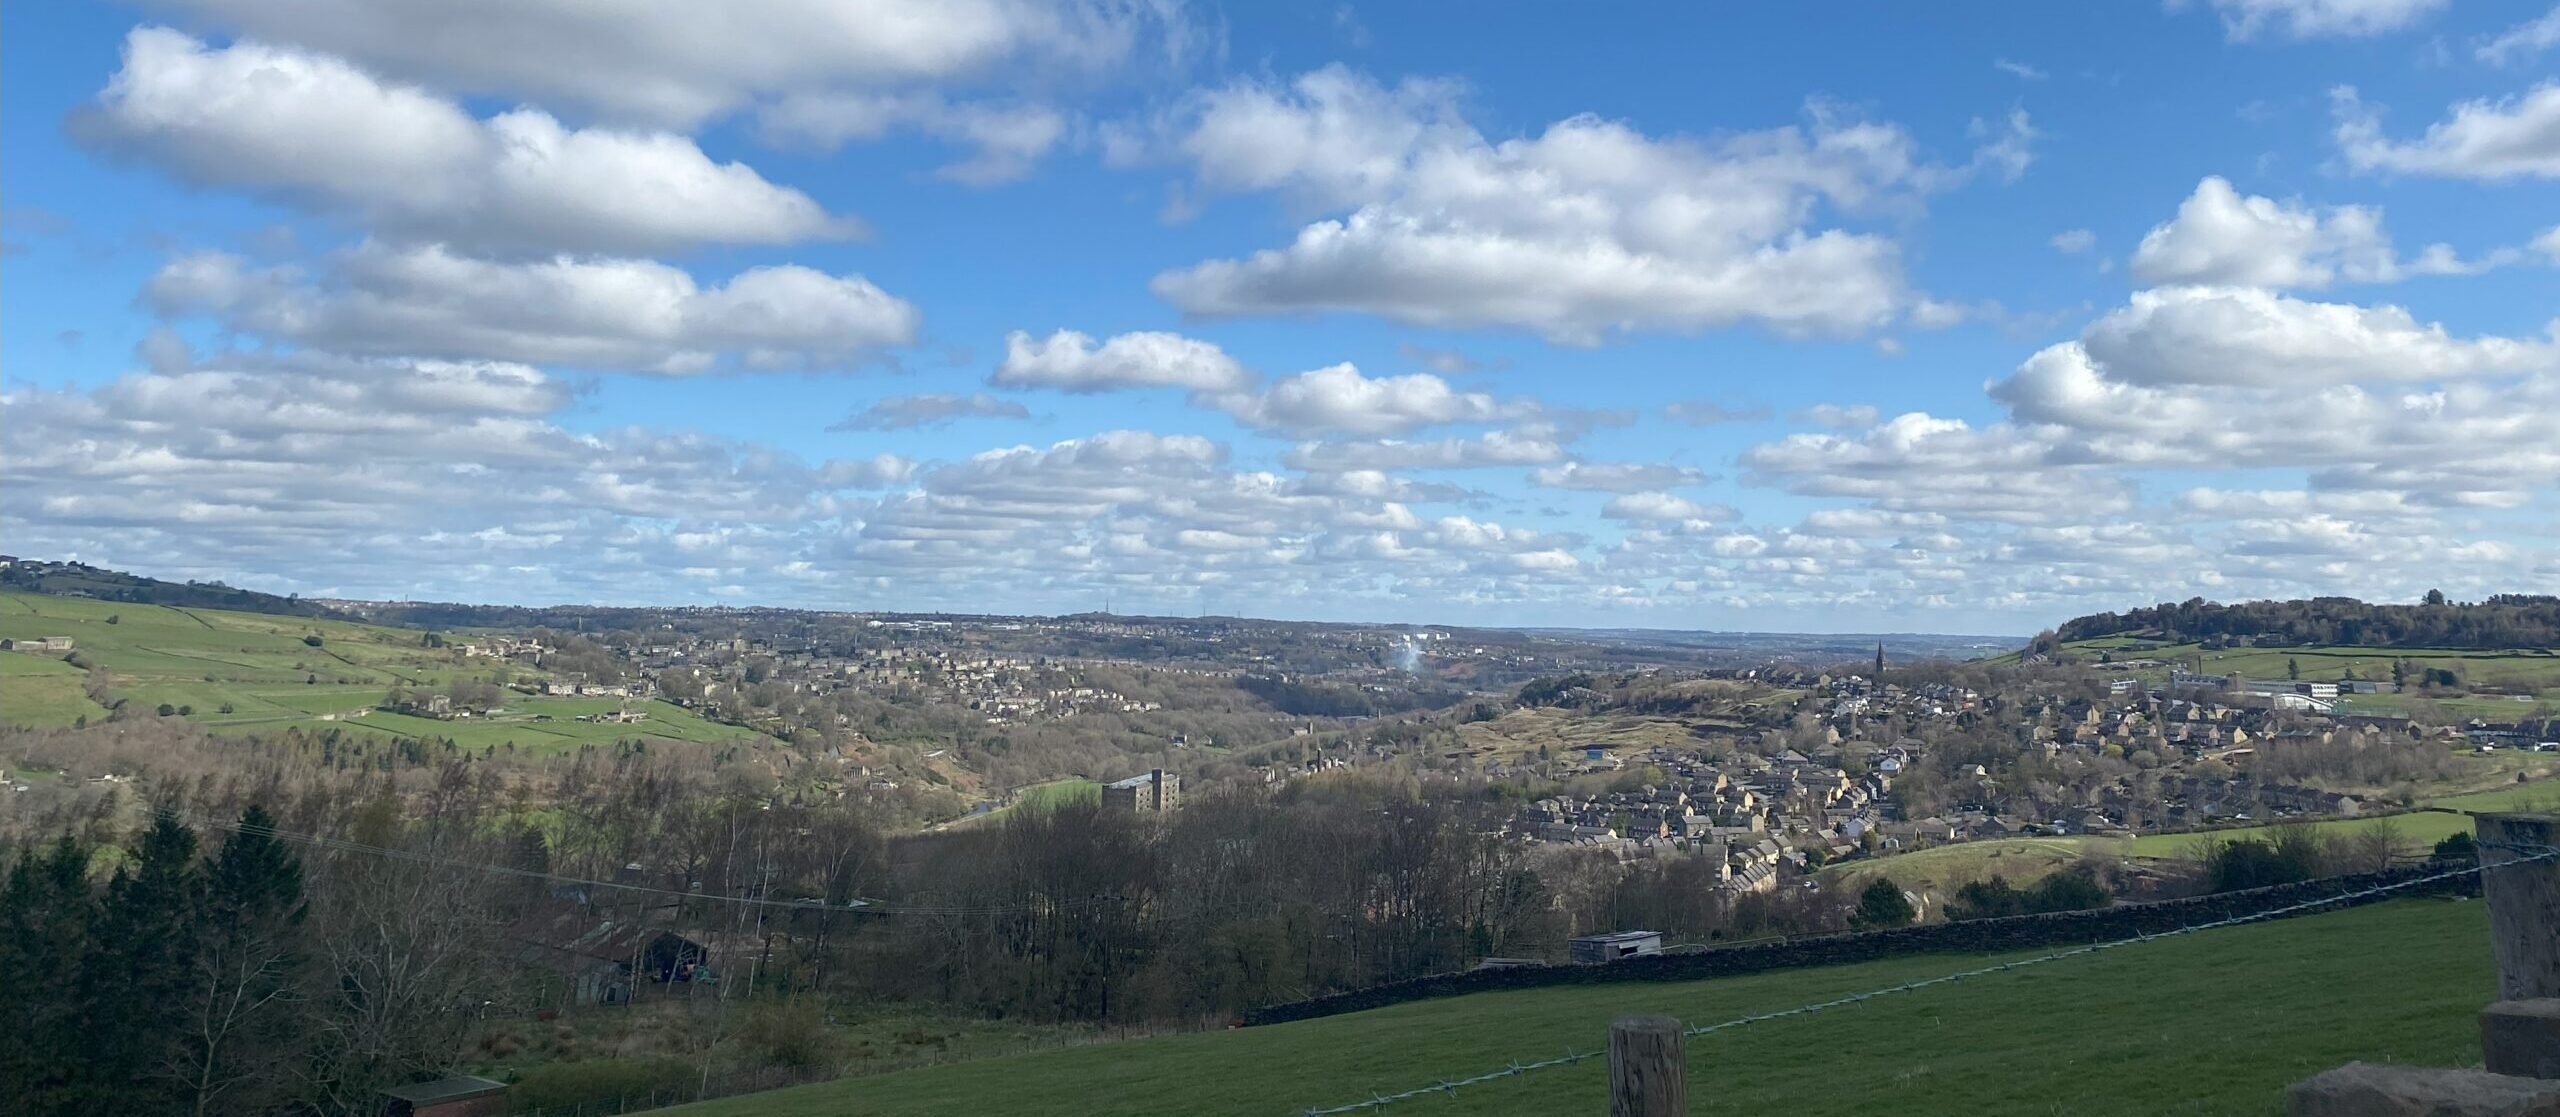 A photograph showing a landscape in Huddersfield, West Yorkshire where VISTA is based.